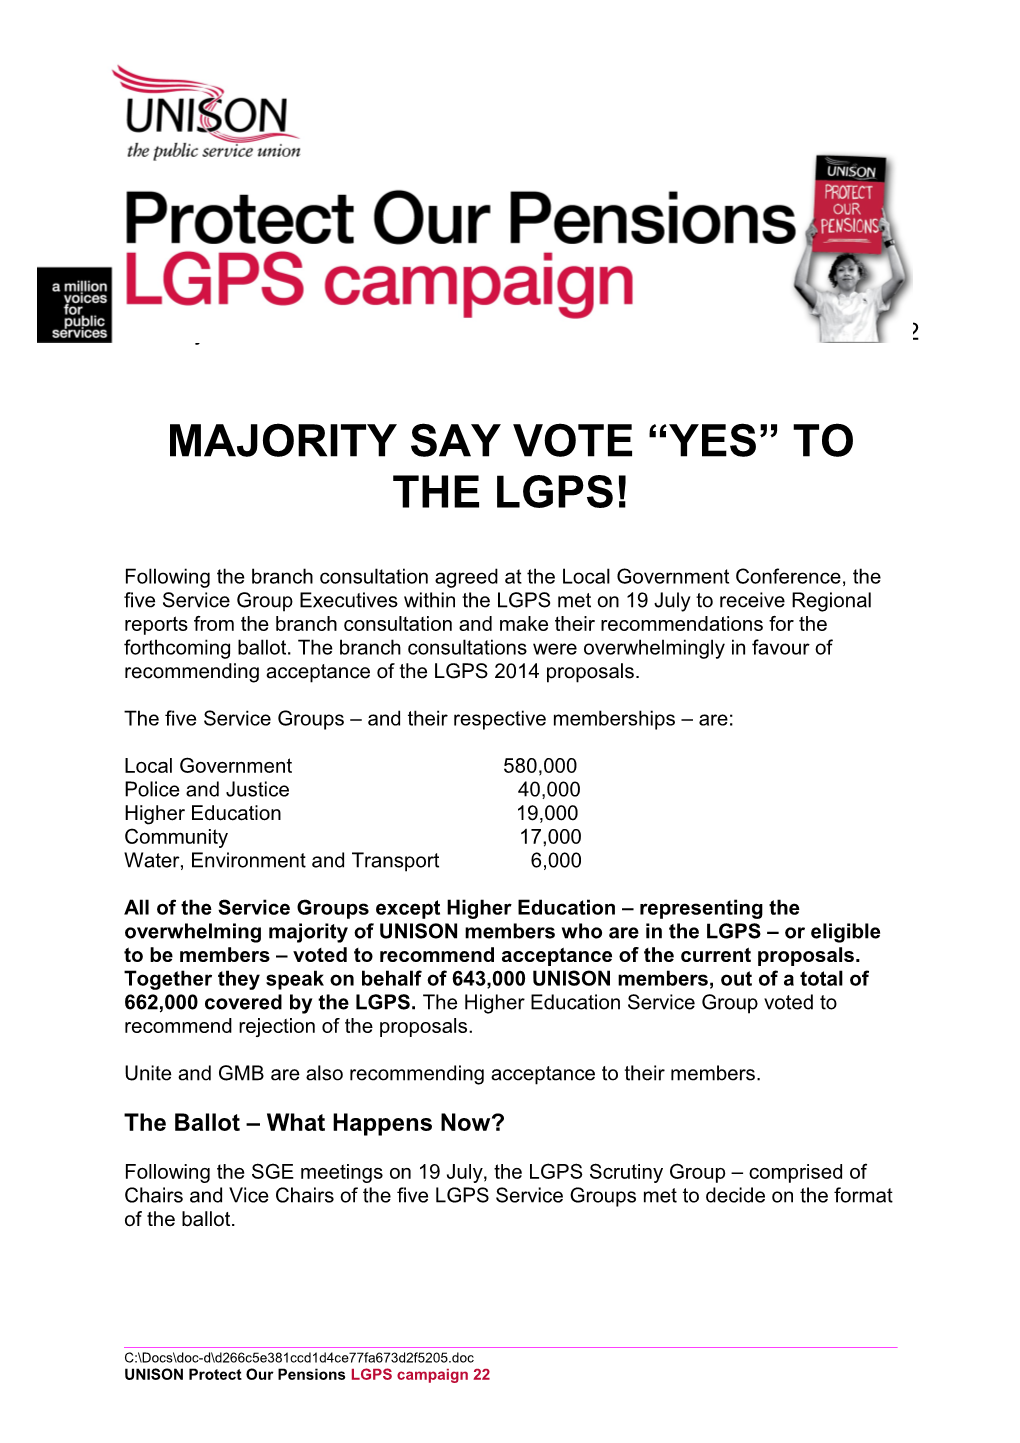 Majority Say Vote Yes to the Lgps!